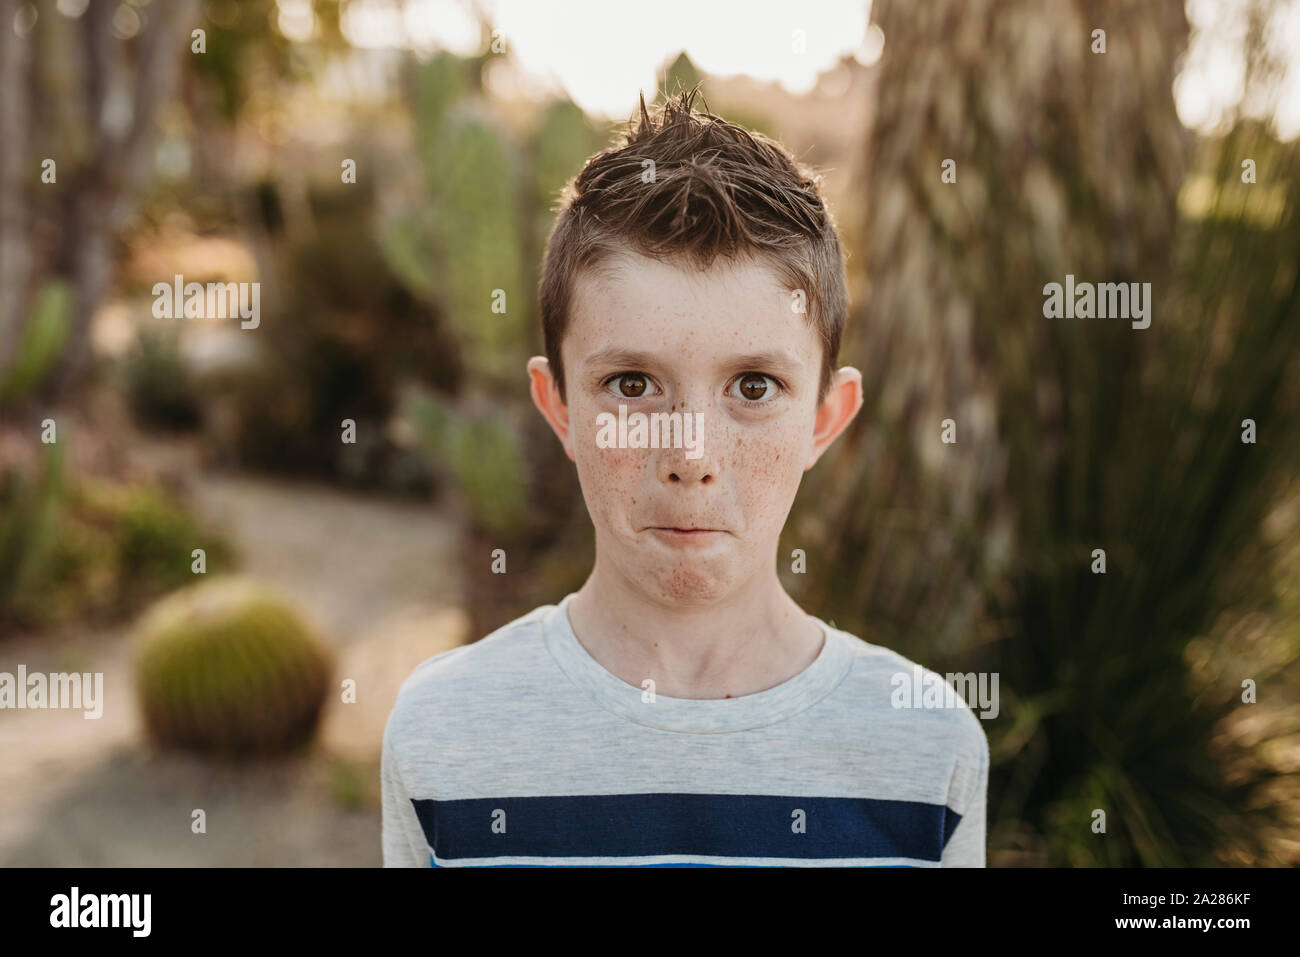 Close up portrait of young boy with freckles making face Banque D'Images